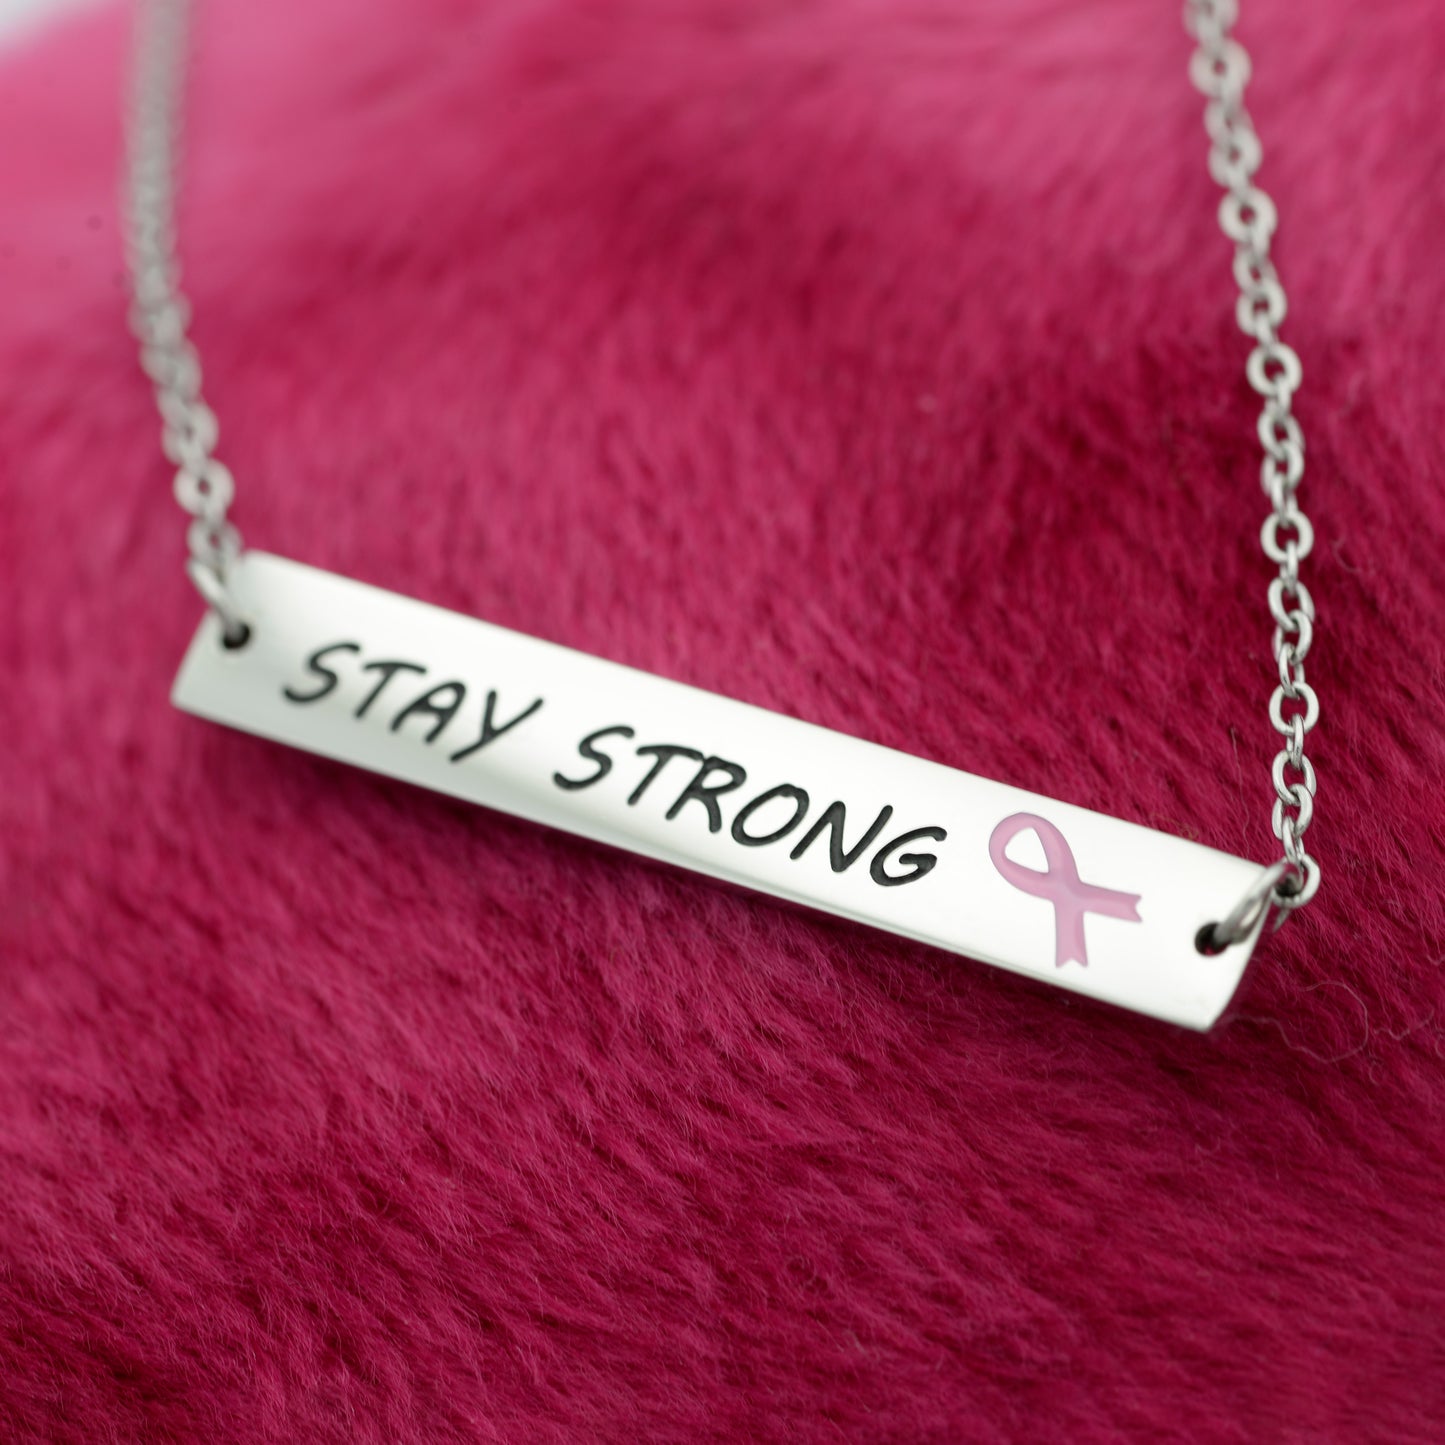 Stay Strong Inspirational Bar Pendant Necklace with Pink Ribbon for Breast Cancer Awareness Womens Necklace